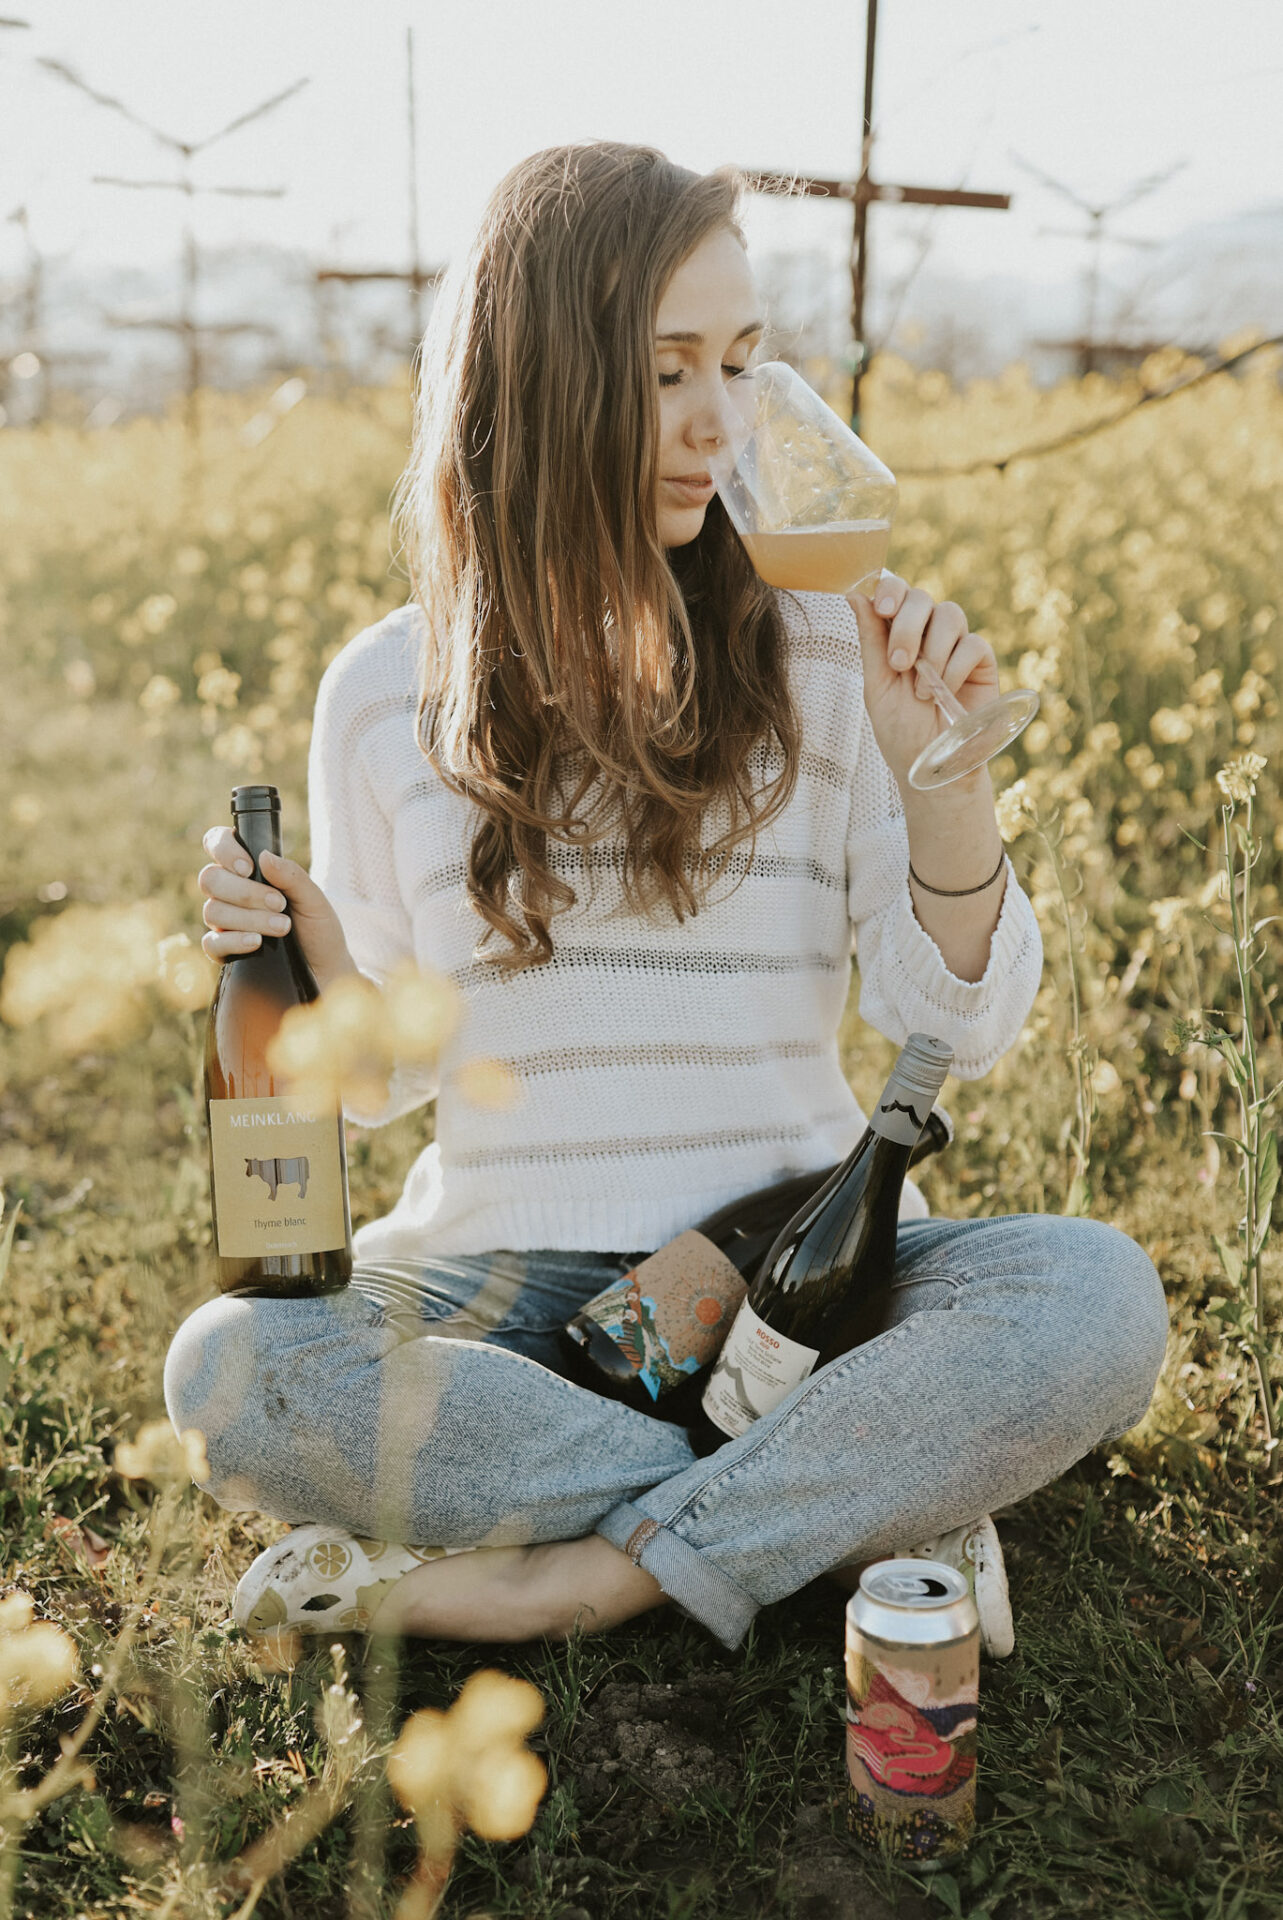 Paige holding bottles of the Best Sweet White Wines and a glass of white wine in a field